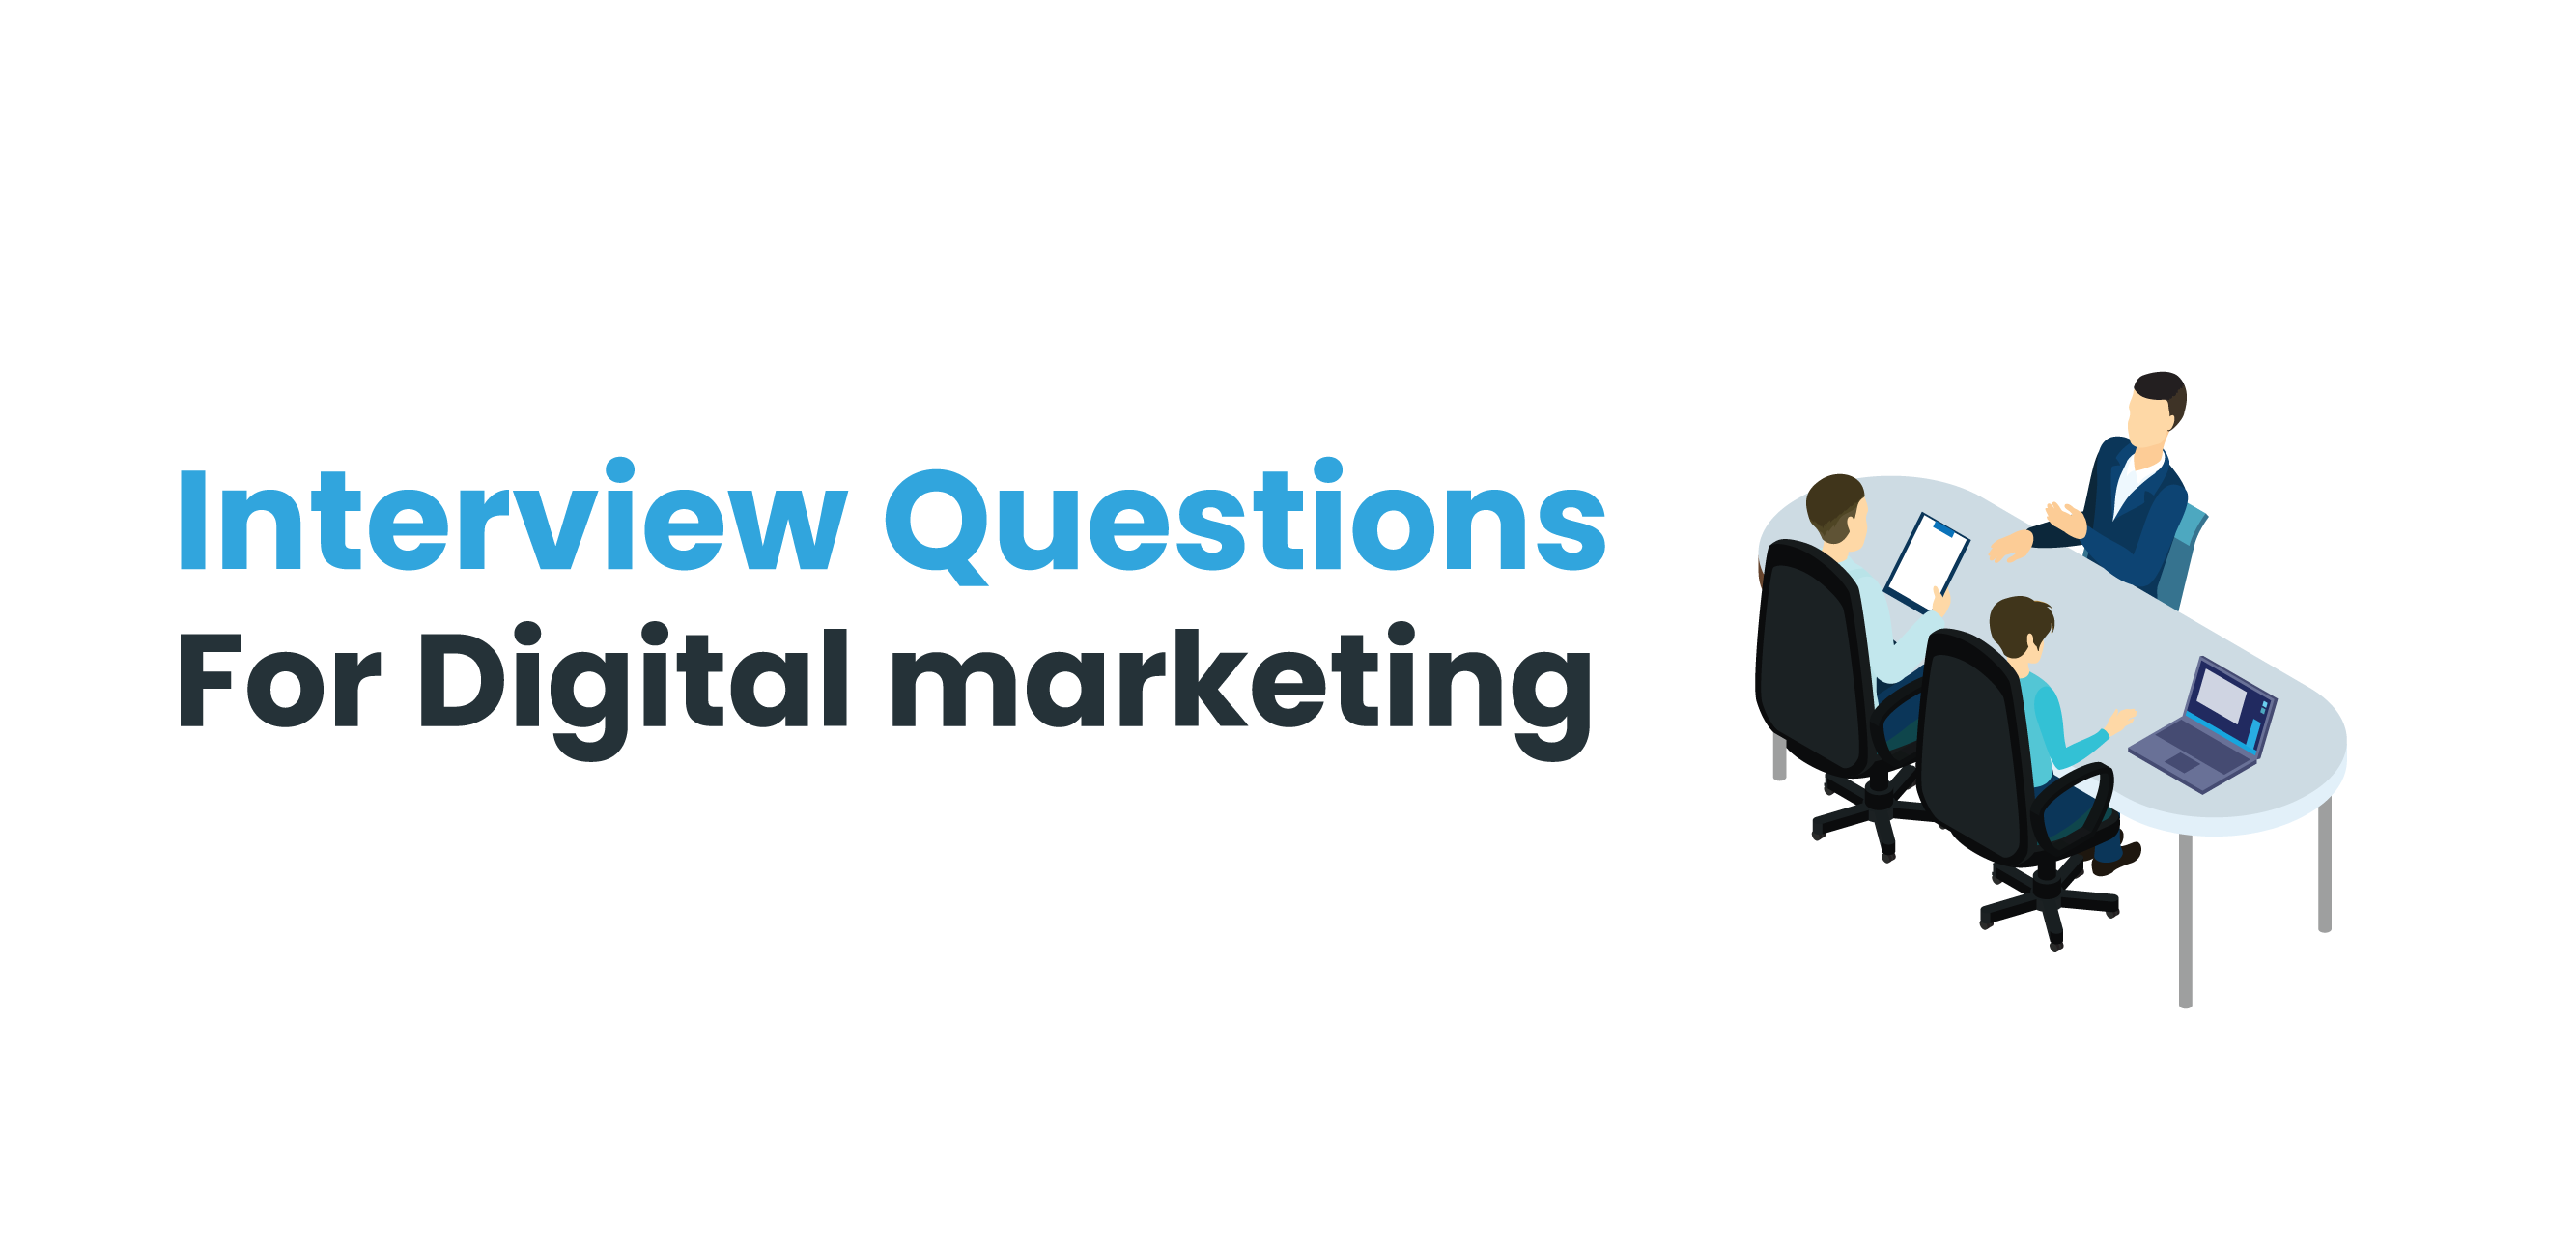 Interview questions for Digital Marketing